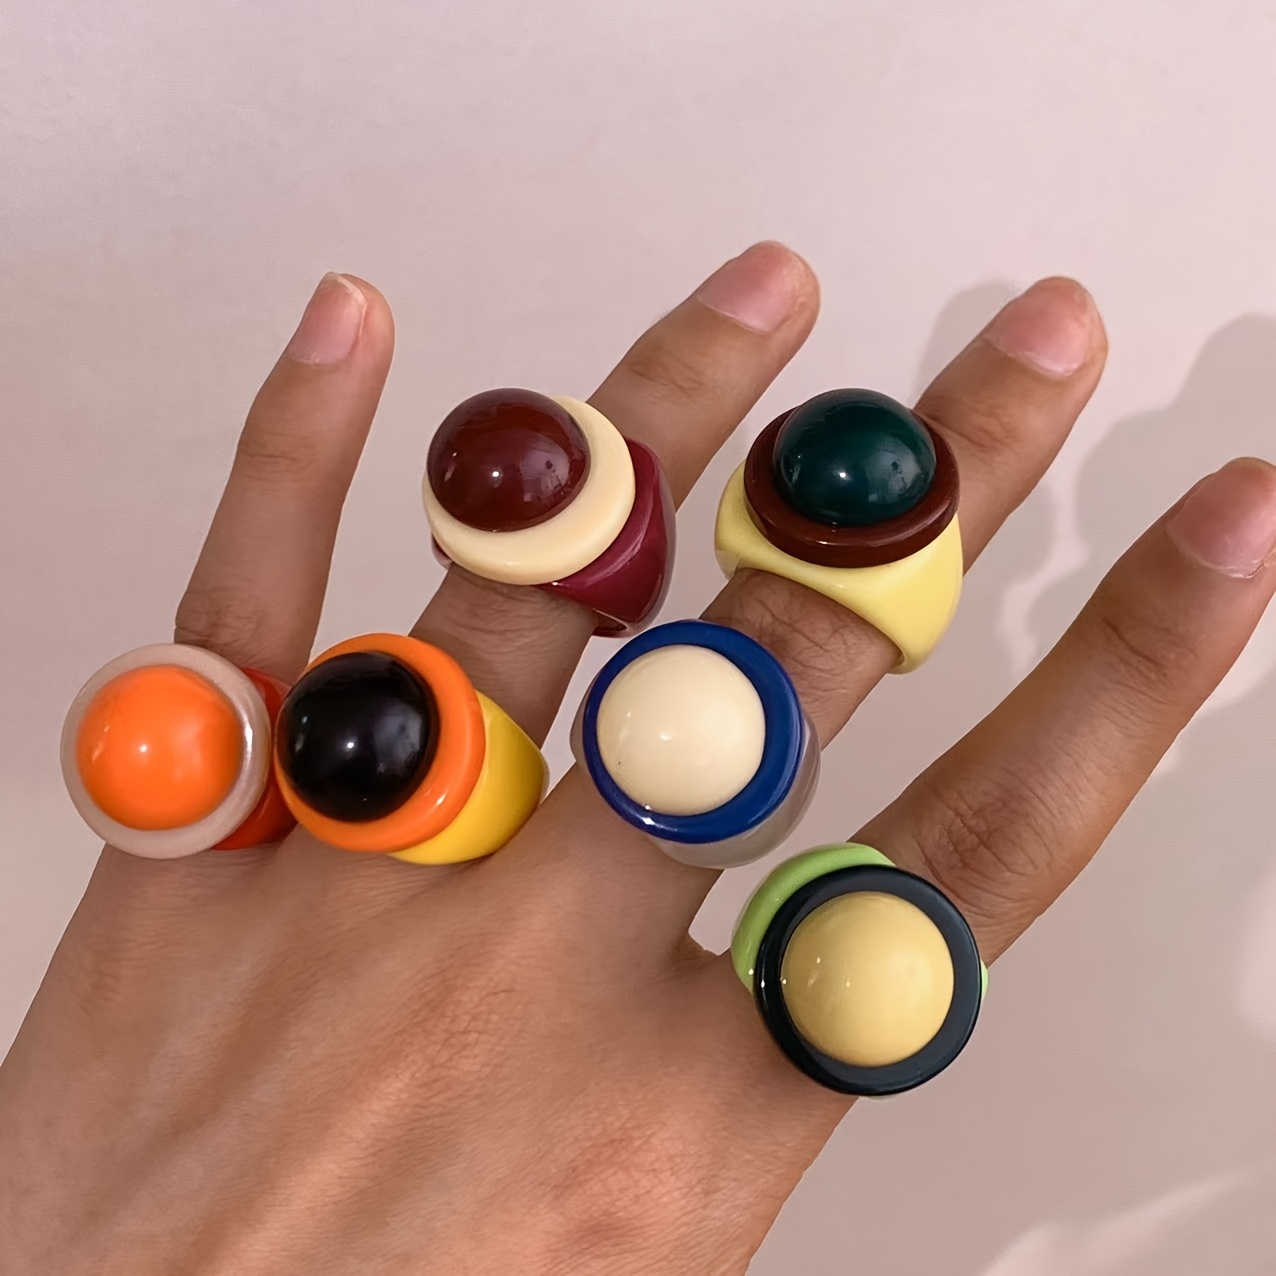 

Vintage Boho Style Resin Ring Set - 6 Pieces Y2k Dopamine Color Mix Chunky Acrylic Rings For Daily And Party Occasions